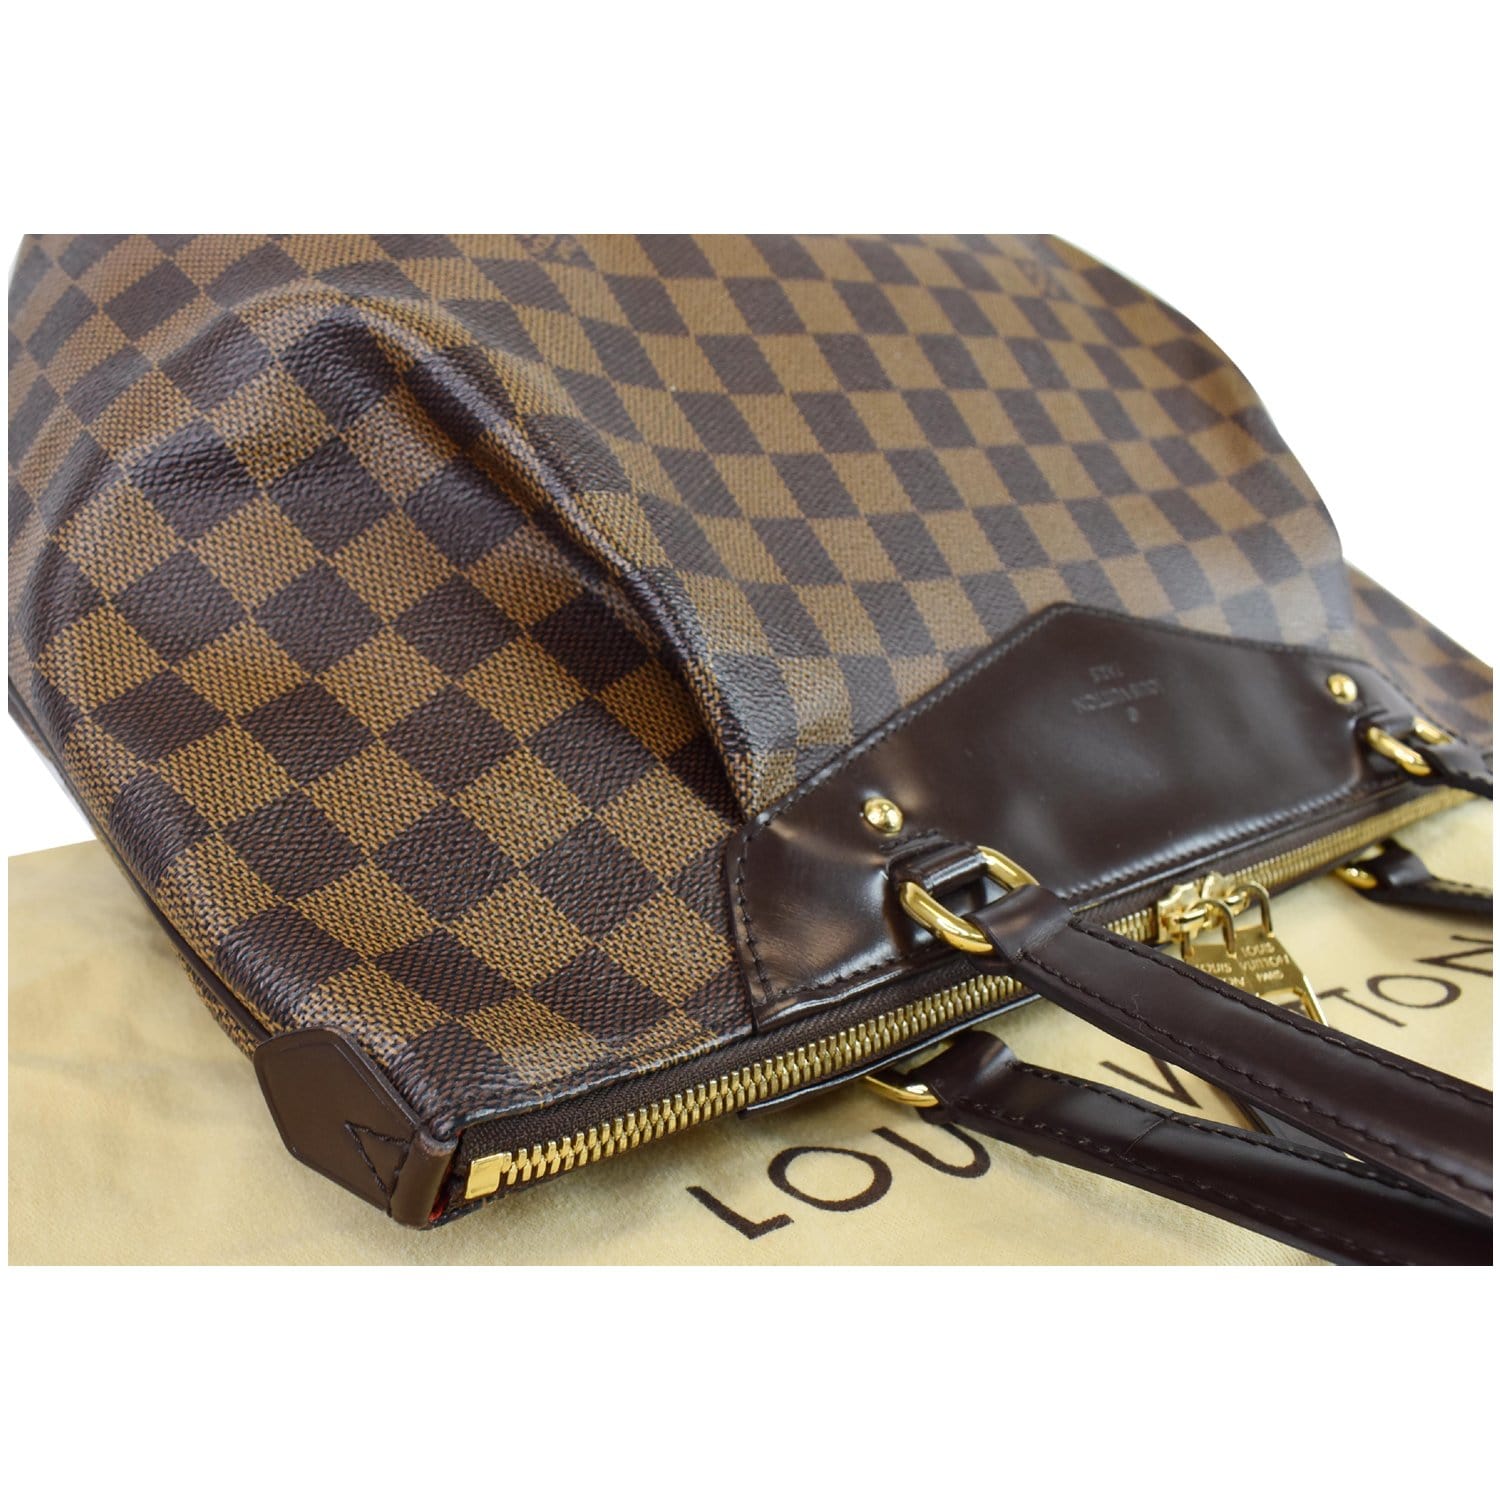 Louis Vuitton Westminster Brown Canvas Tote Bag (Pre-Owned)